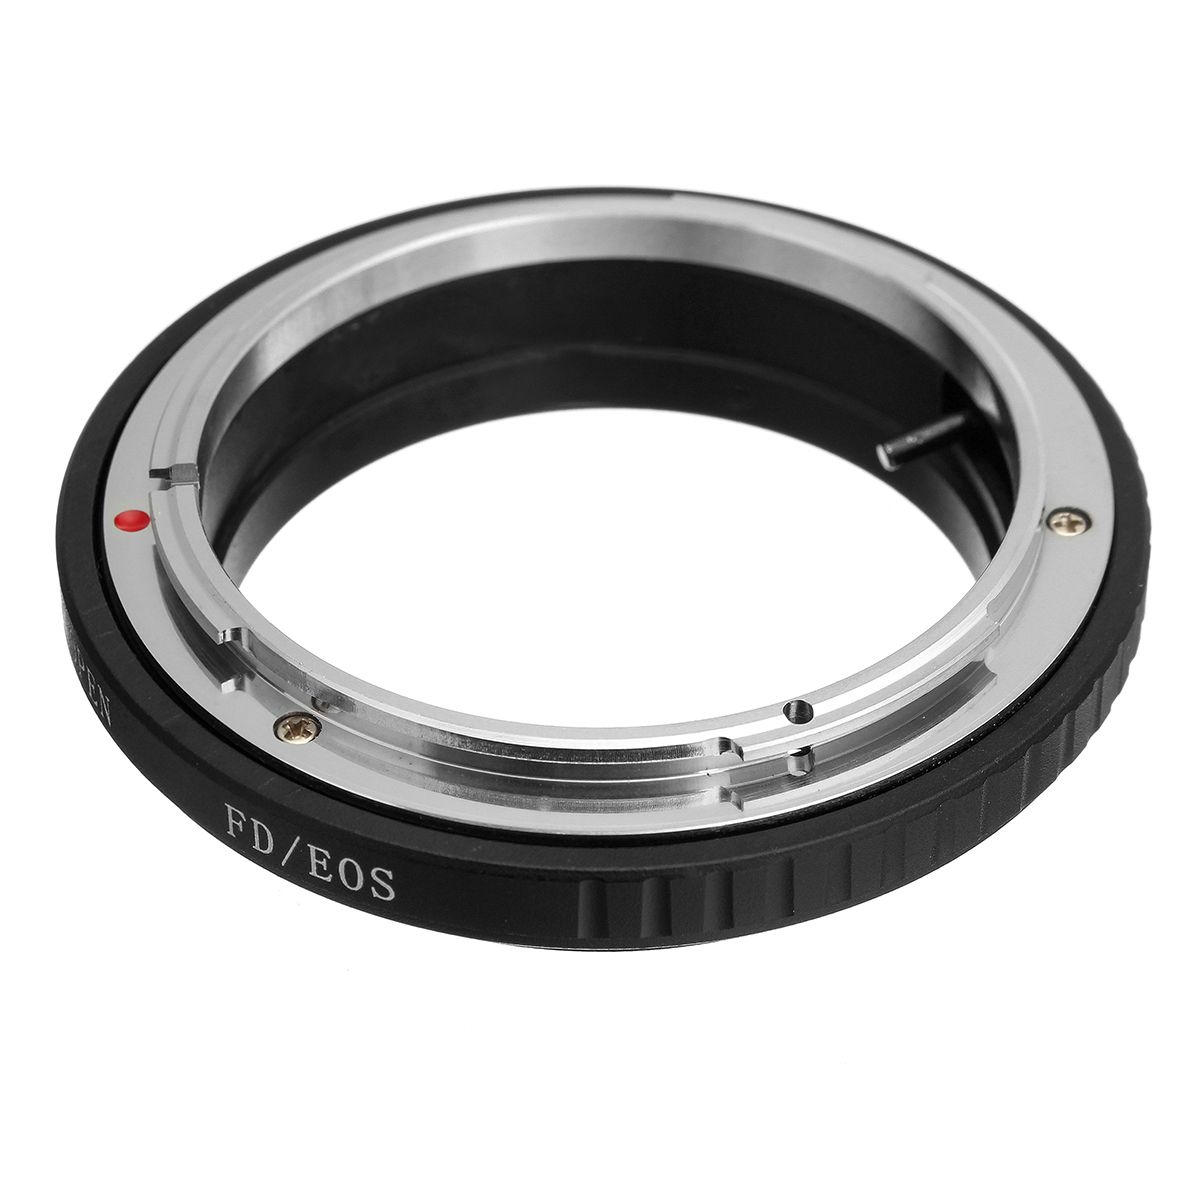 FD-EOS-Mount-Adapter-Ring-No-Glass-For-Canon-FD-Lens-To-EOS-EF-Camera-1339982